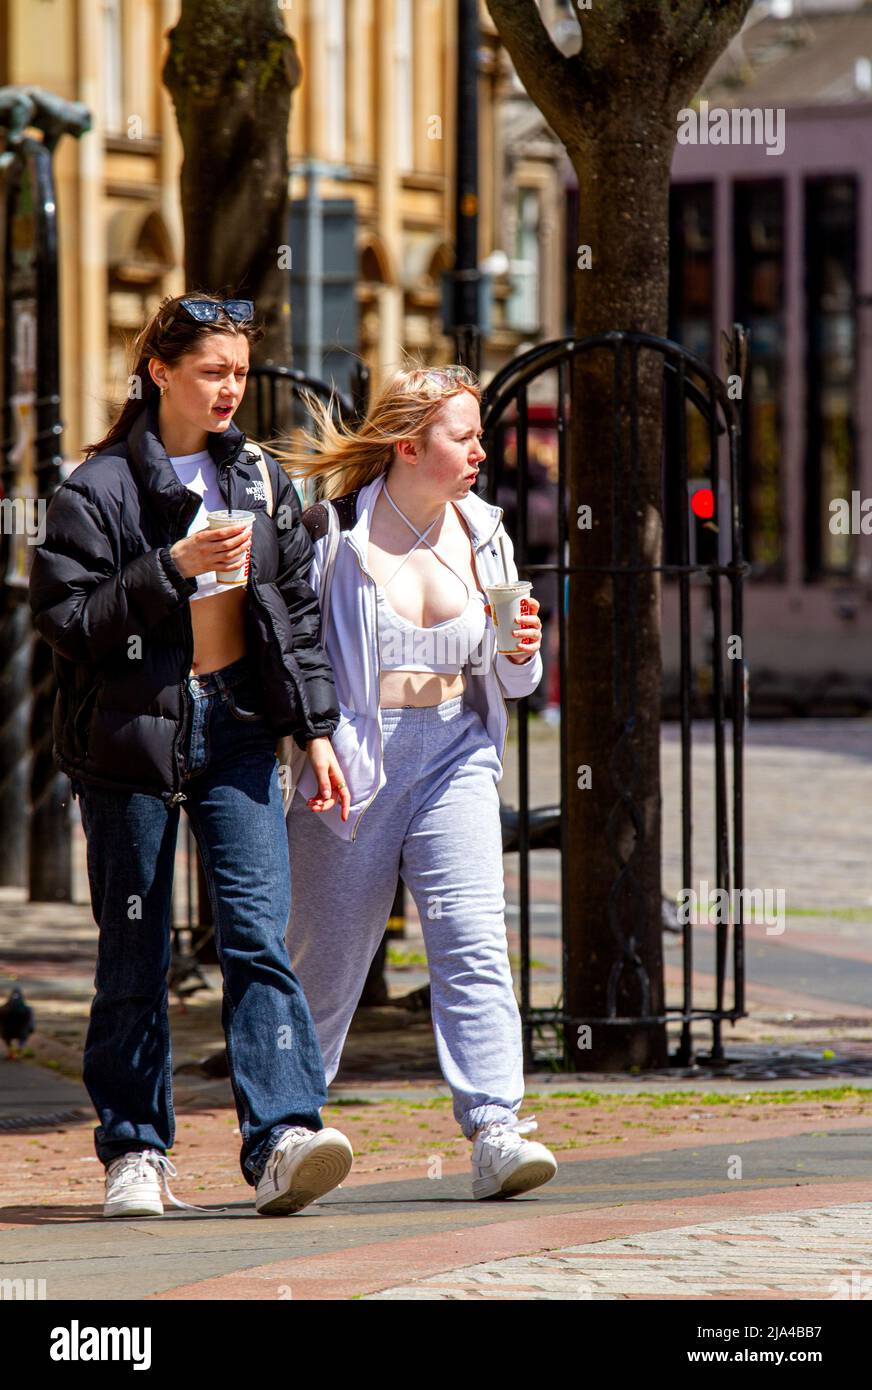 Dundee, Tayside, Scotland, UK. 27th May, 2022. UK Weather. Temperatures in parts of North East Scotland reached 17°C due to blustery conditions and warm sunshine. Despite the strong winds and sunny periods during the day, only a few fashionable Dundee women are out and about in the city centre, spending the day shopping and socializing while enjoying the warm late Spring weather. Credit: Dundee Photographics/Alamy Live News Stock Photo